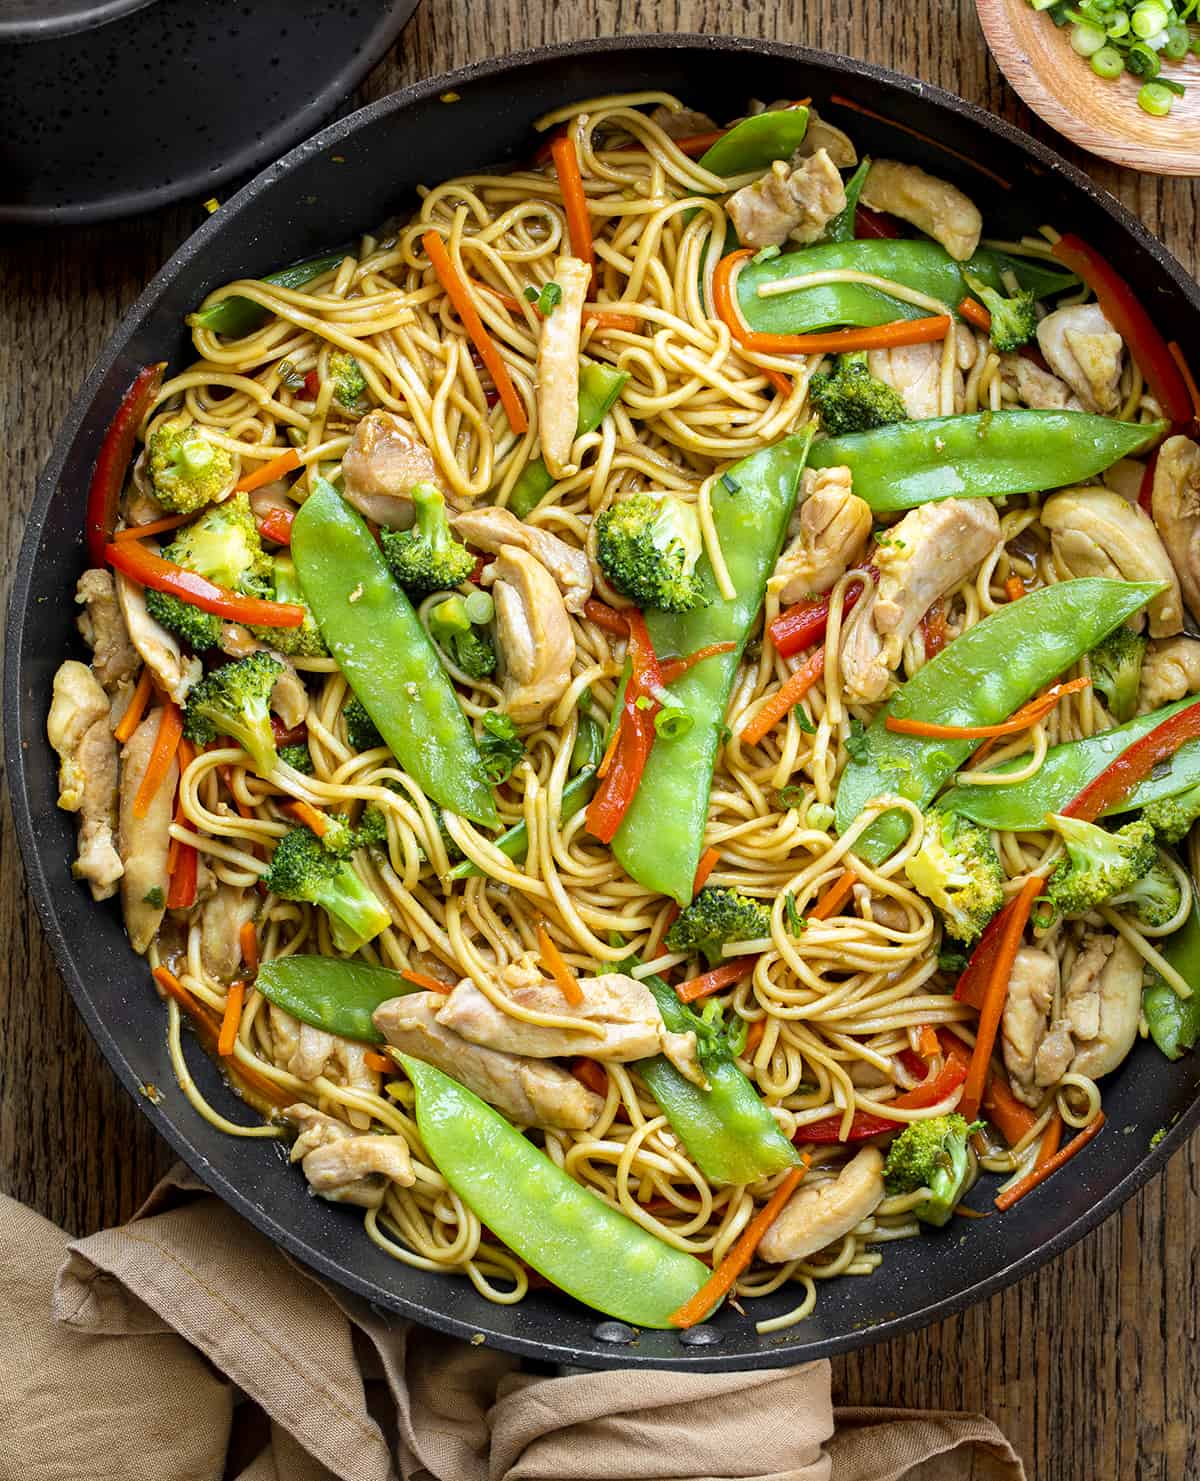 Chicken Lo Mein in a Skillet Ready to Serve. Dinner, Supper, How to Make Lo Mein, Chicken Lo mein, Chicken thigh Lo Mein, American Lo Mein, Noodles, Asian Inspired Lo Mein, The Best Lo Mein, i am homesteader, iamhomesteader